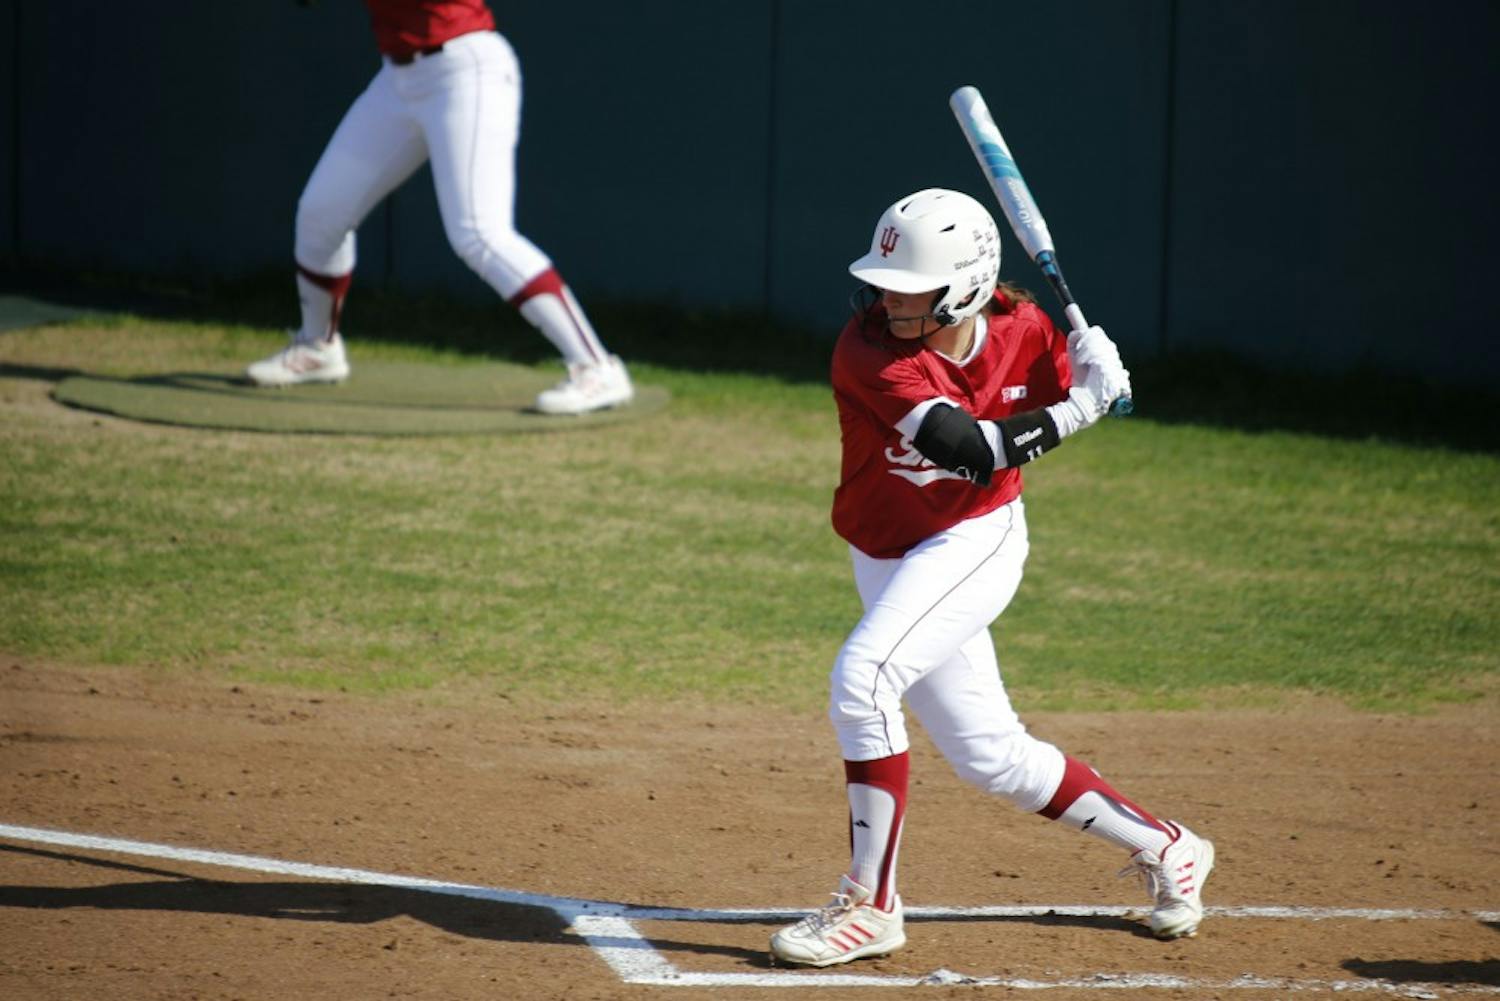 Freshman Outfielder Rebecca Blitz swings her bat during IU's first game against Purdue at the Andy Mohr Field on Apr. 22, 2015. IU won 6-3 after Mena Fulton hit a 3-run home run during the last inning of the game. 